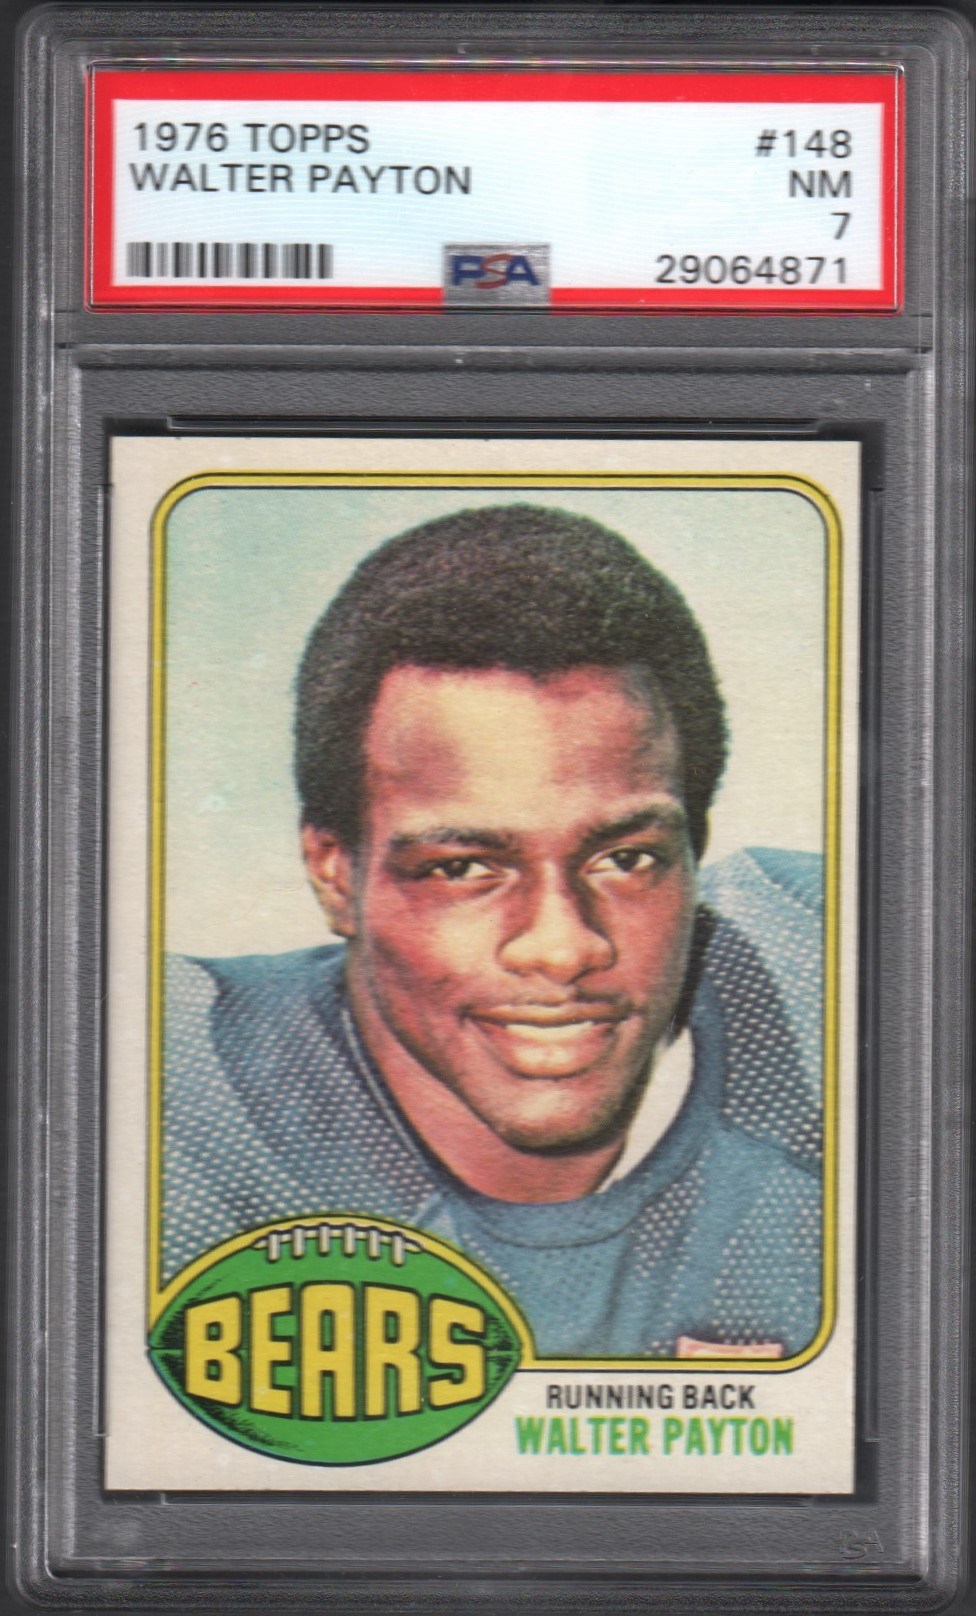 - 1976 Topps Football Complete Set (528) with Walter Payton RC (PSA NM 7)